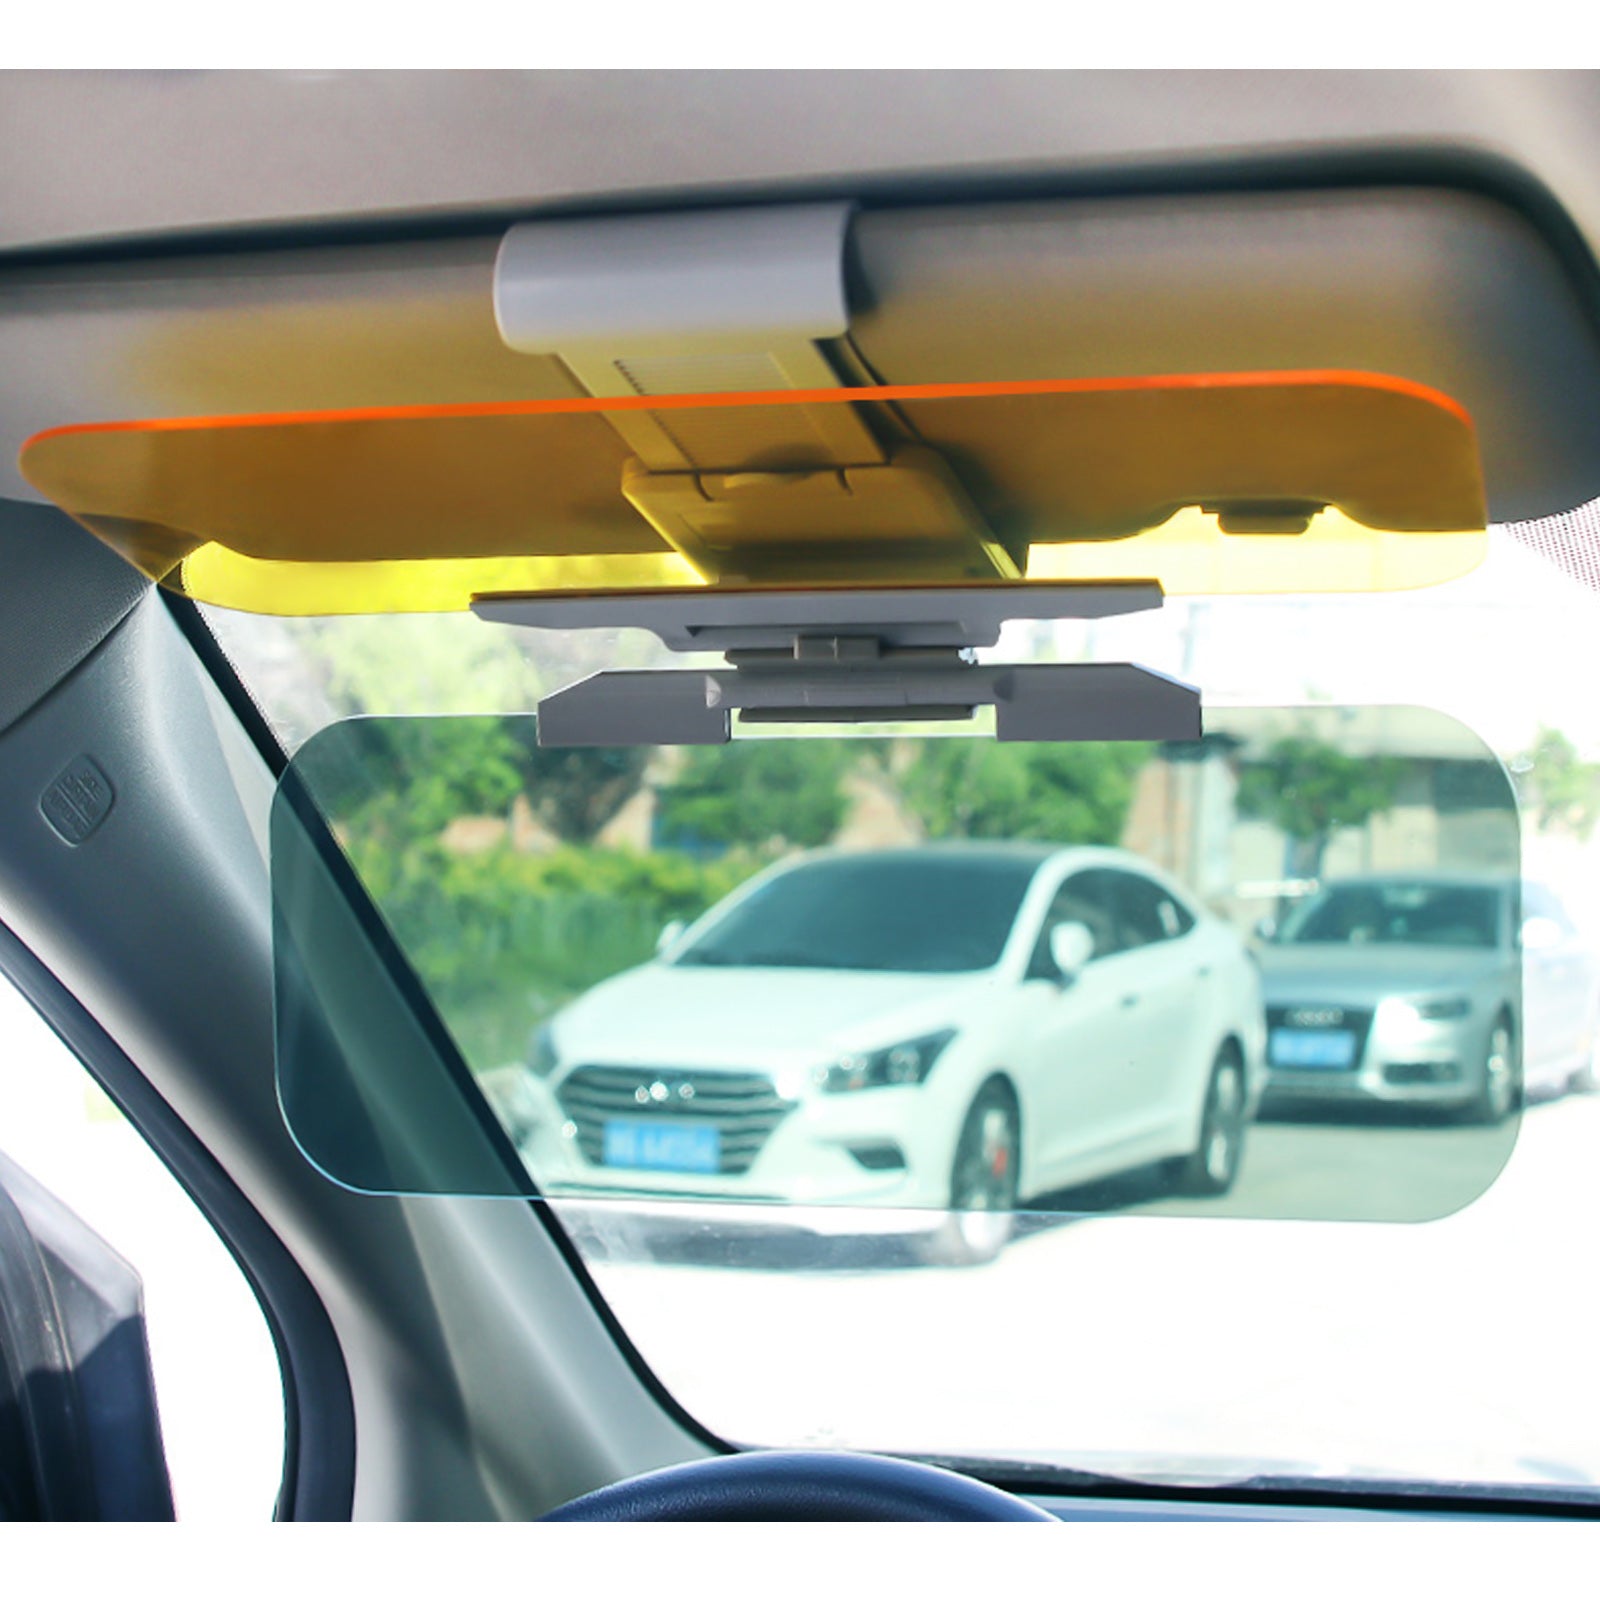 Dropship Sun Visor Extender For Car 2 In 1 Anti-glare Driving Visor With  Adjustable View Angles Day Night Automobile Sun Anti-UV Block Visor For  Clearer Vision Safe Driving UV-Filtering to Sell Online